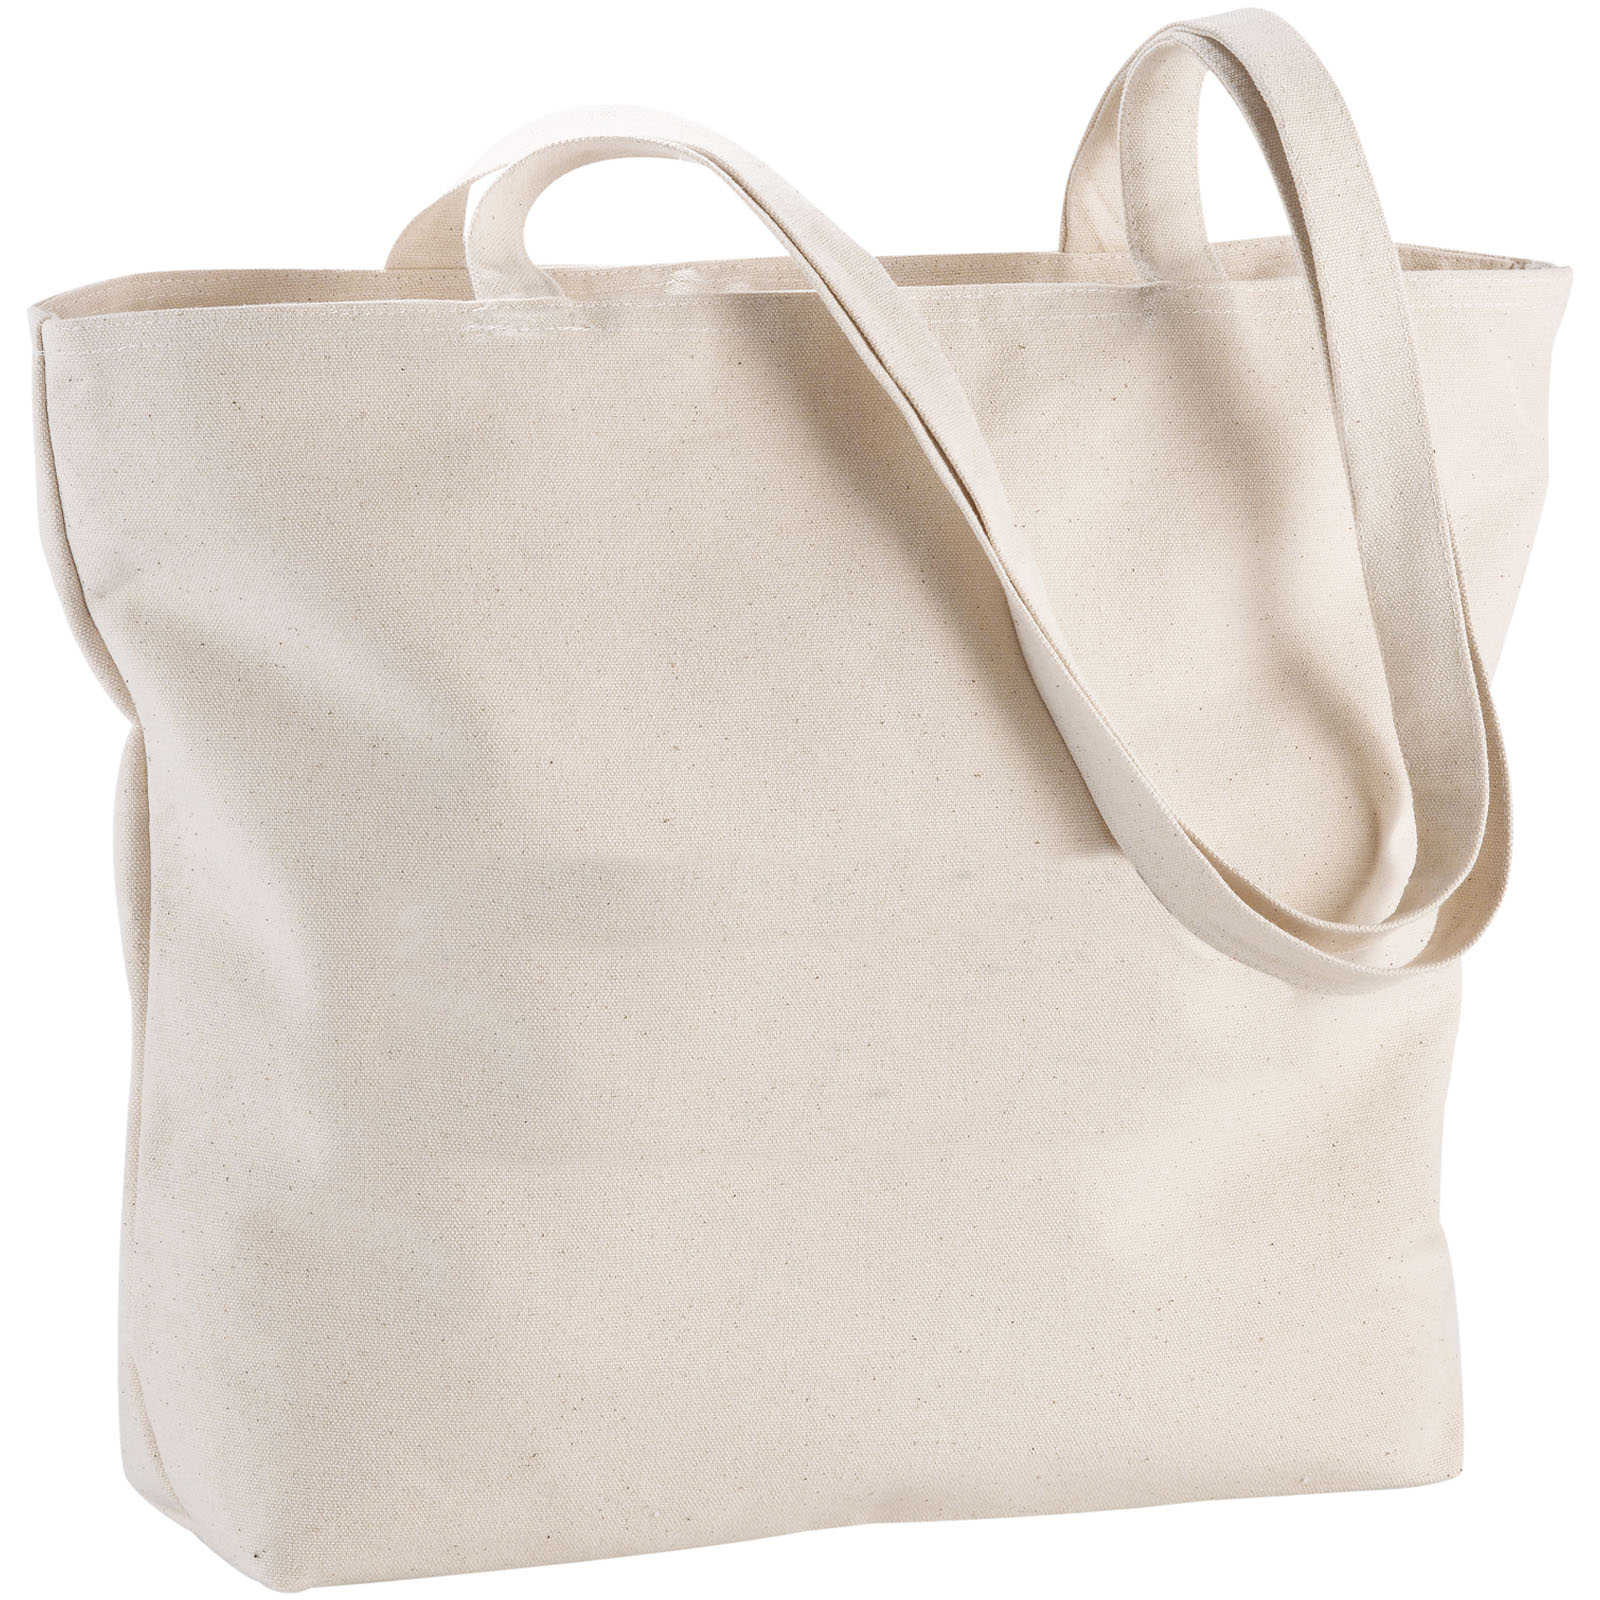 Advertising Cotton Bags - Ningbo 320 g/m² zippered cotton tote bag 15L - 3